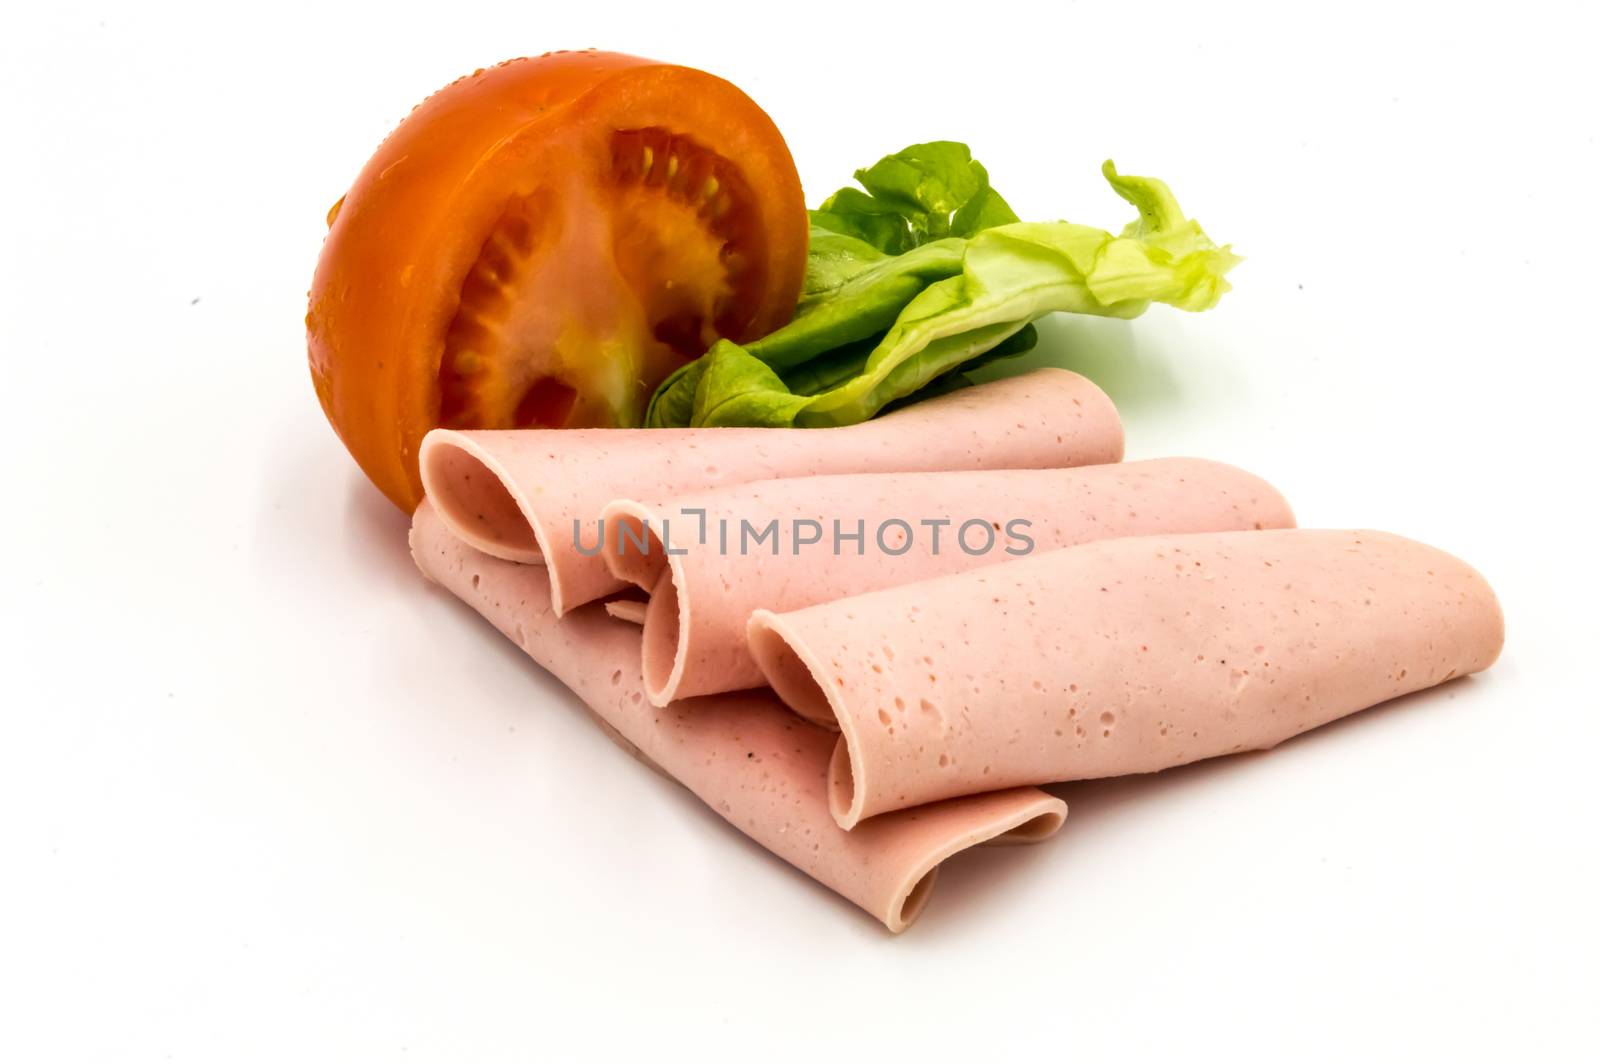 Slice of ham or Paris sausage on a white background with  by Philou1000